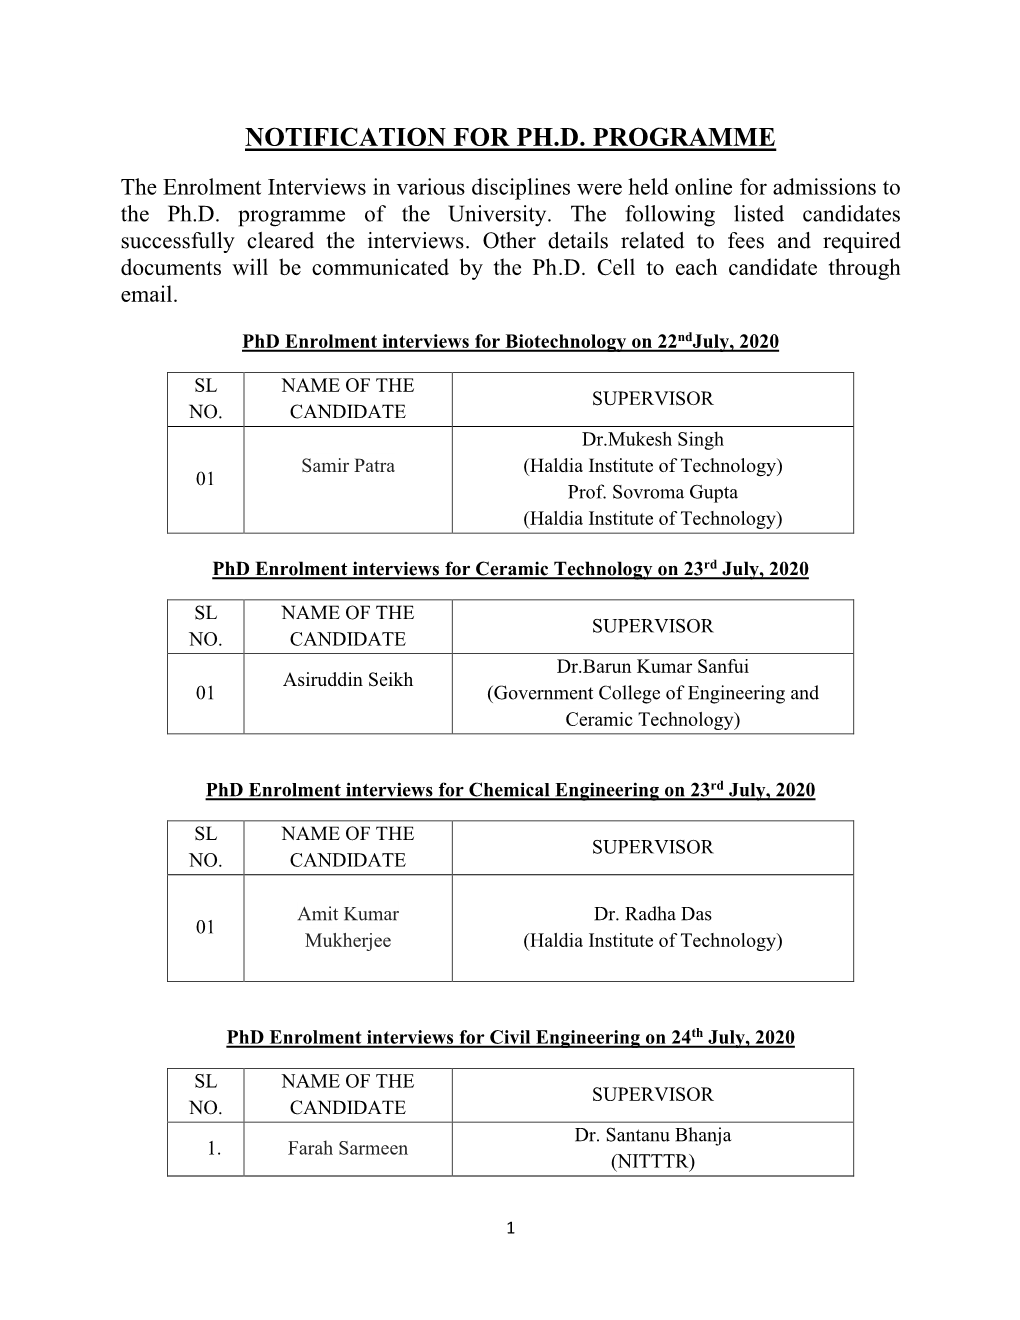 Notification for Ph.D. Programme